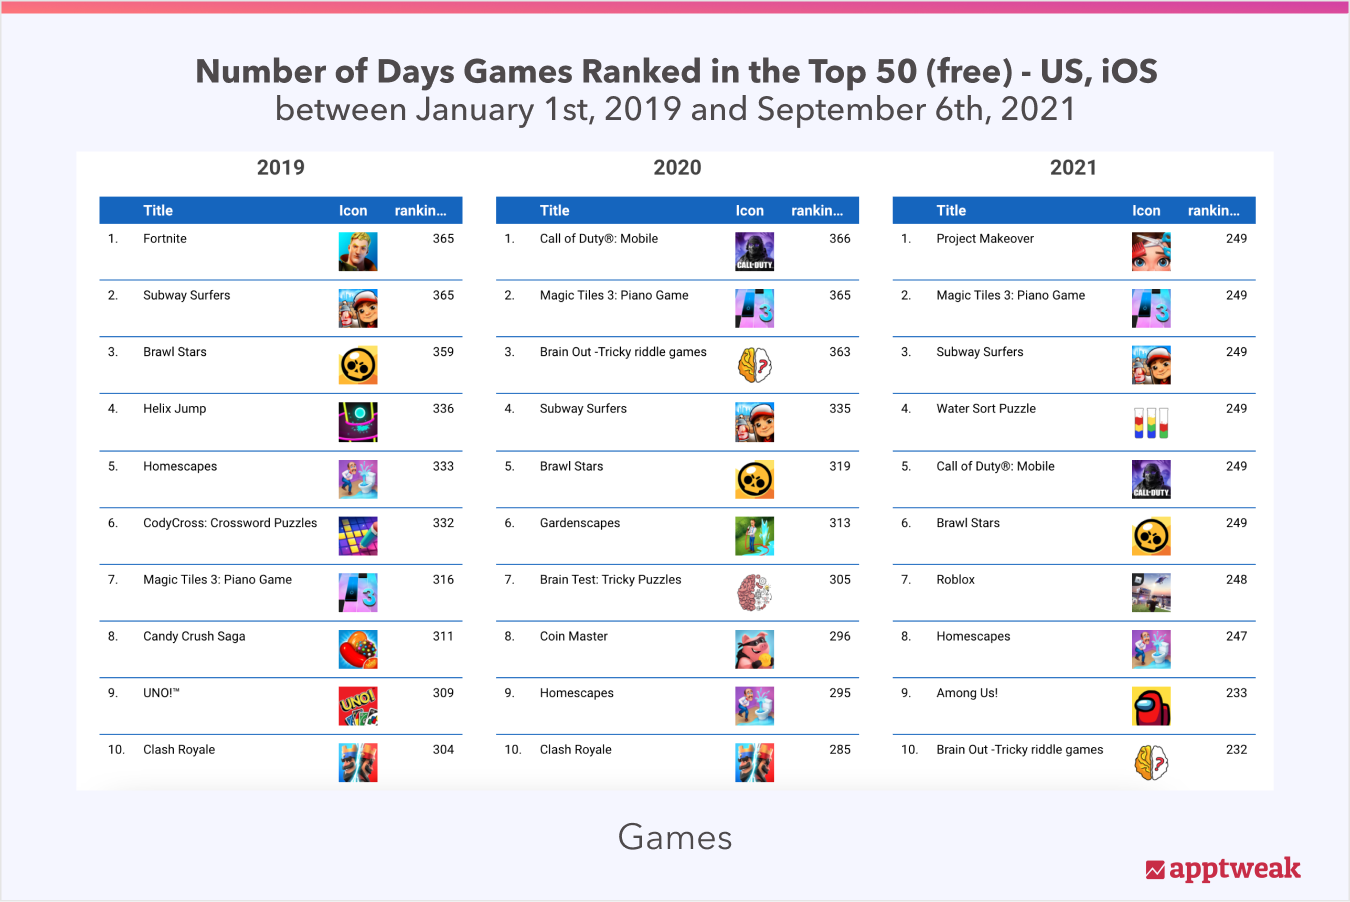 Number of days apps ranked in the top 50 in the categories “All” and “Games” since 2019 (US, iOS)